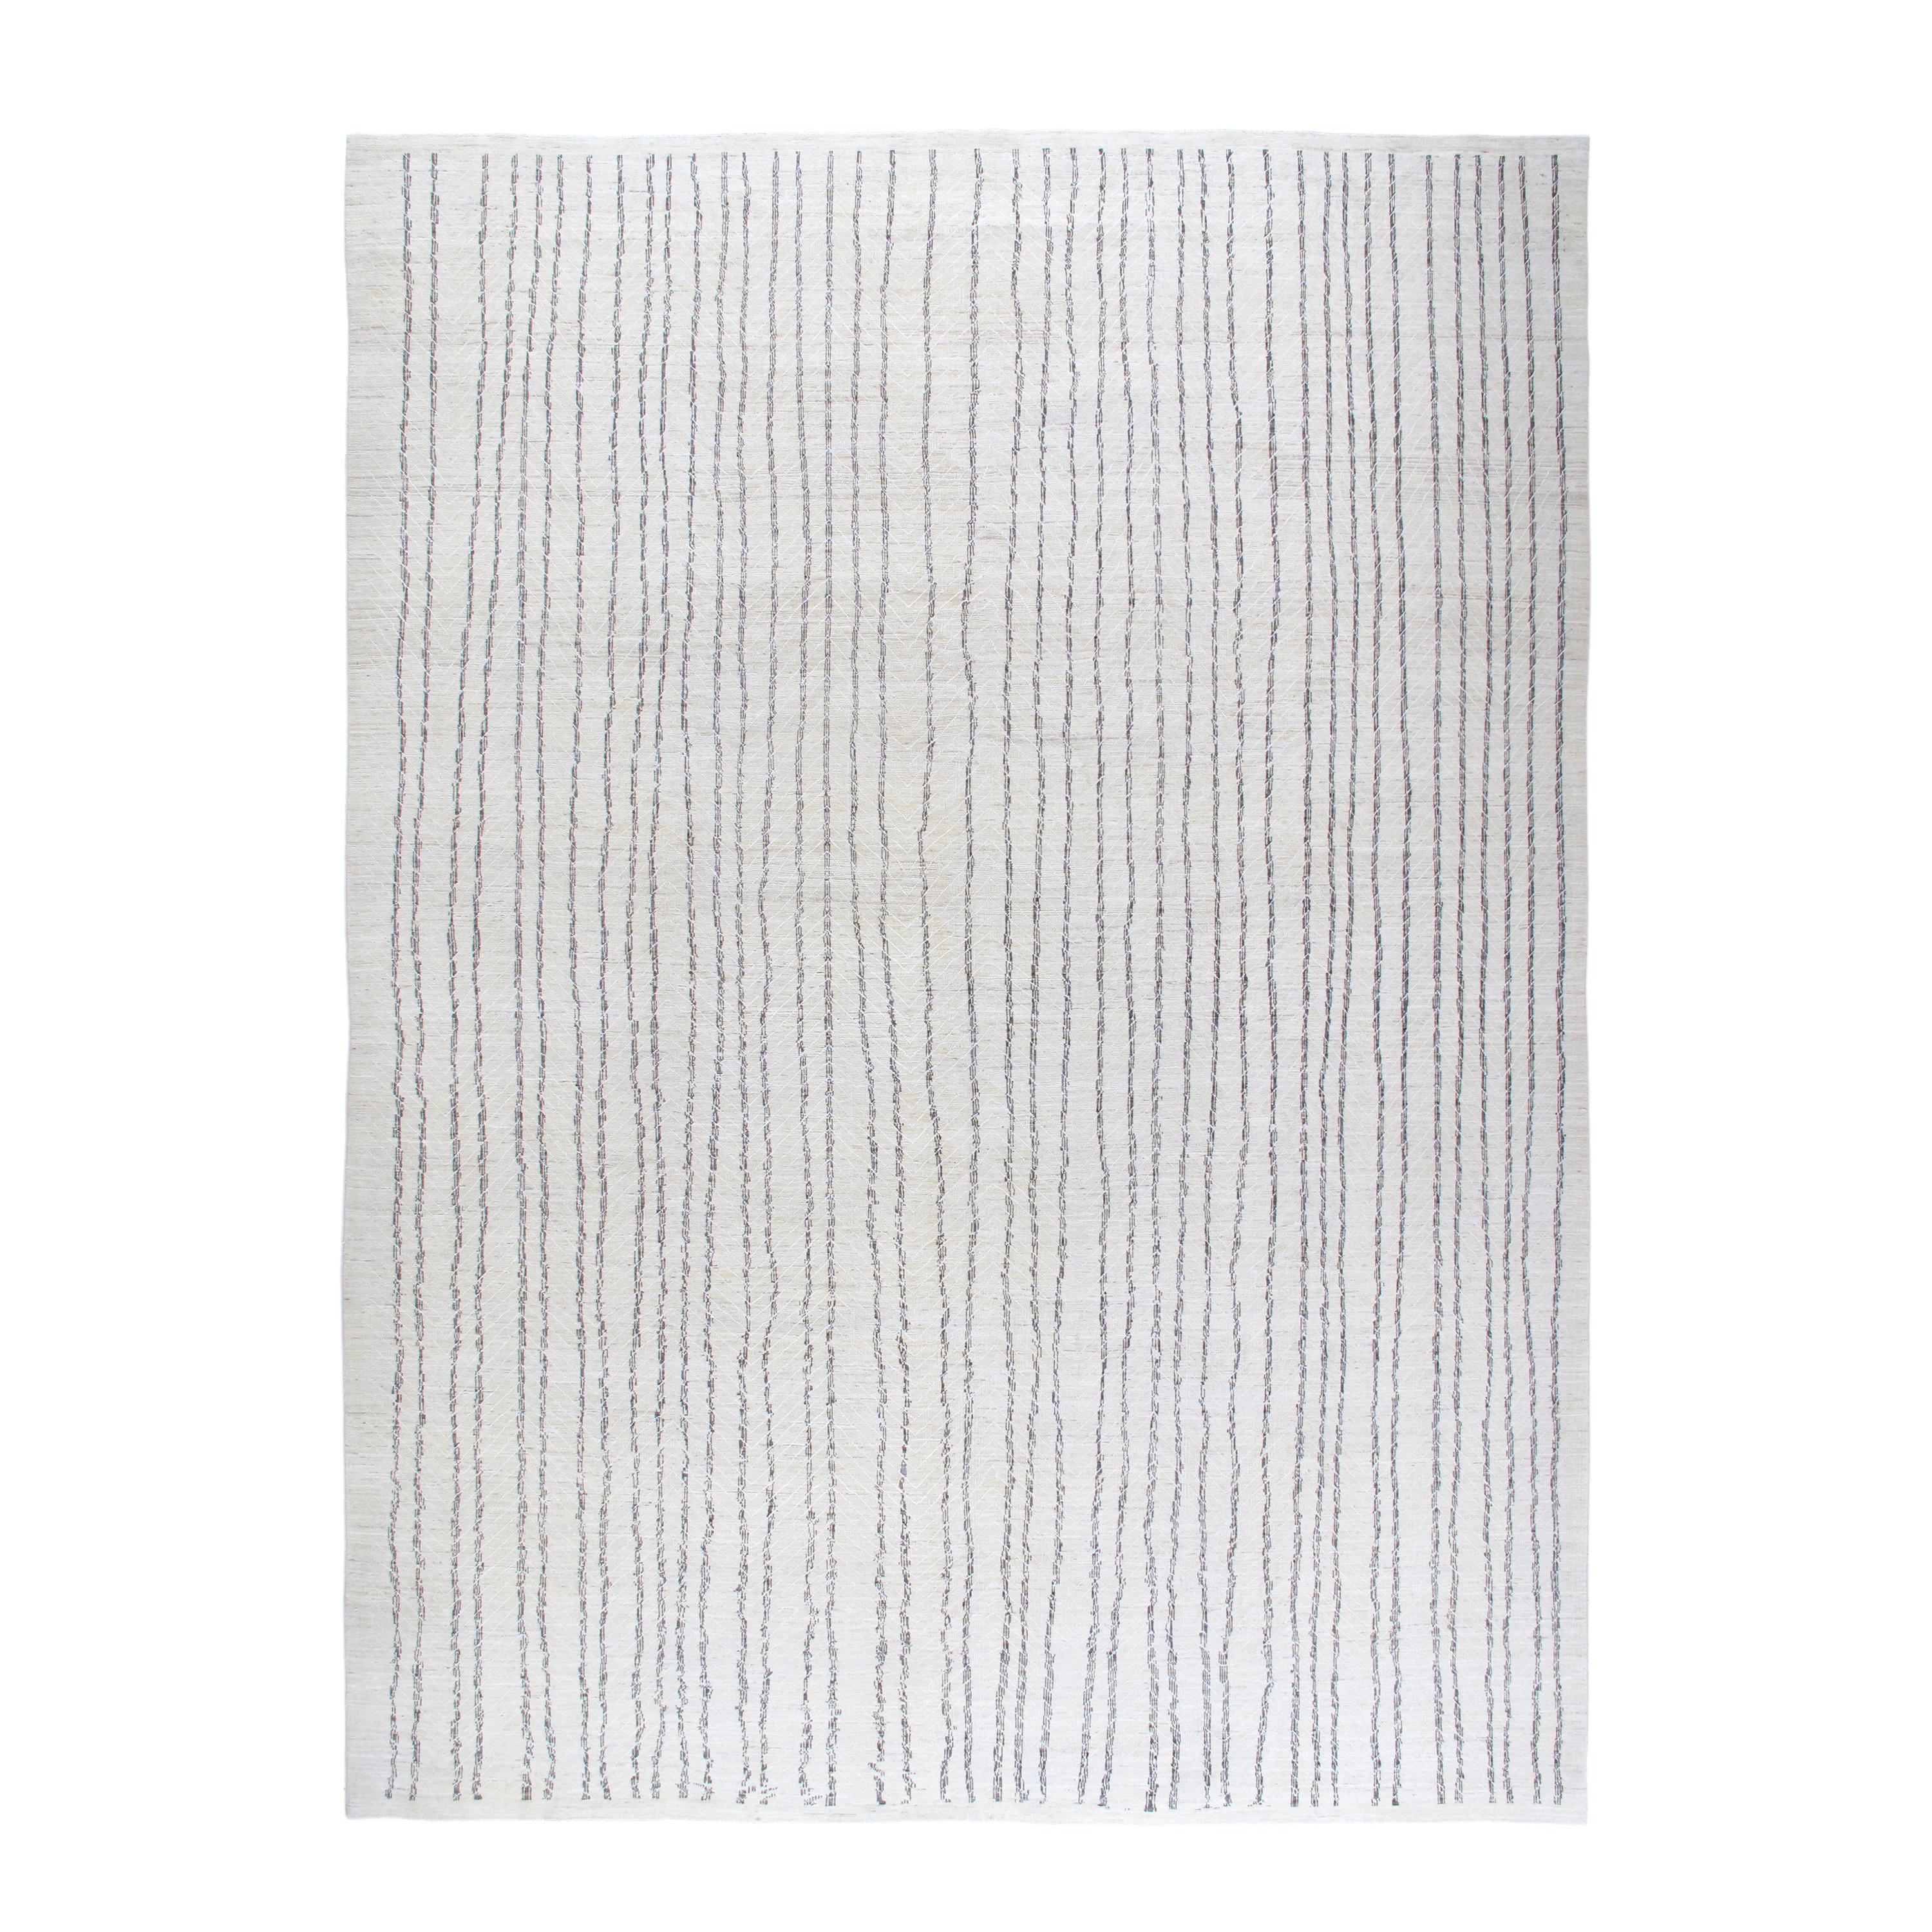 This Composition rug is hand-knotted with a modern style and made of 100% wool.   